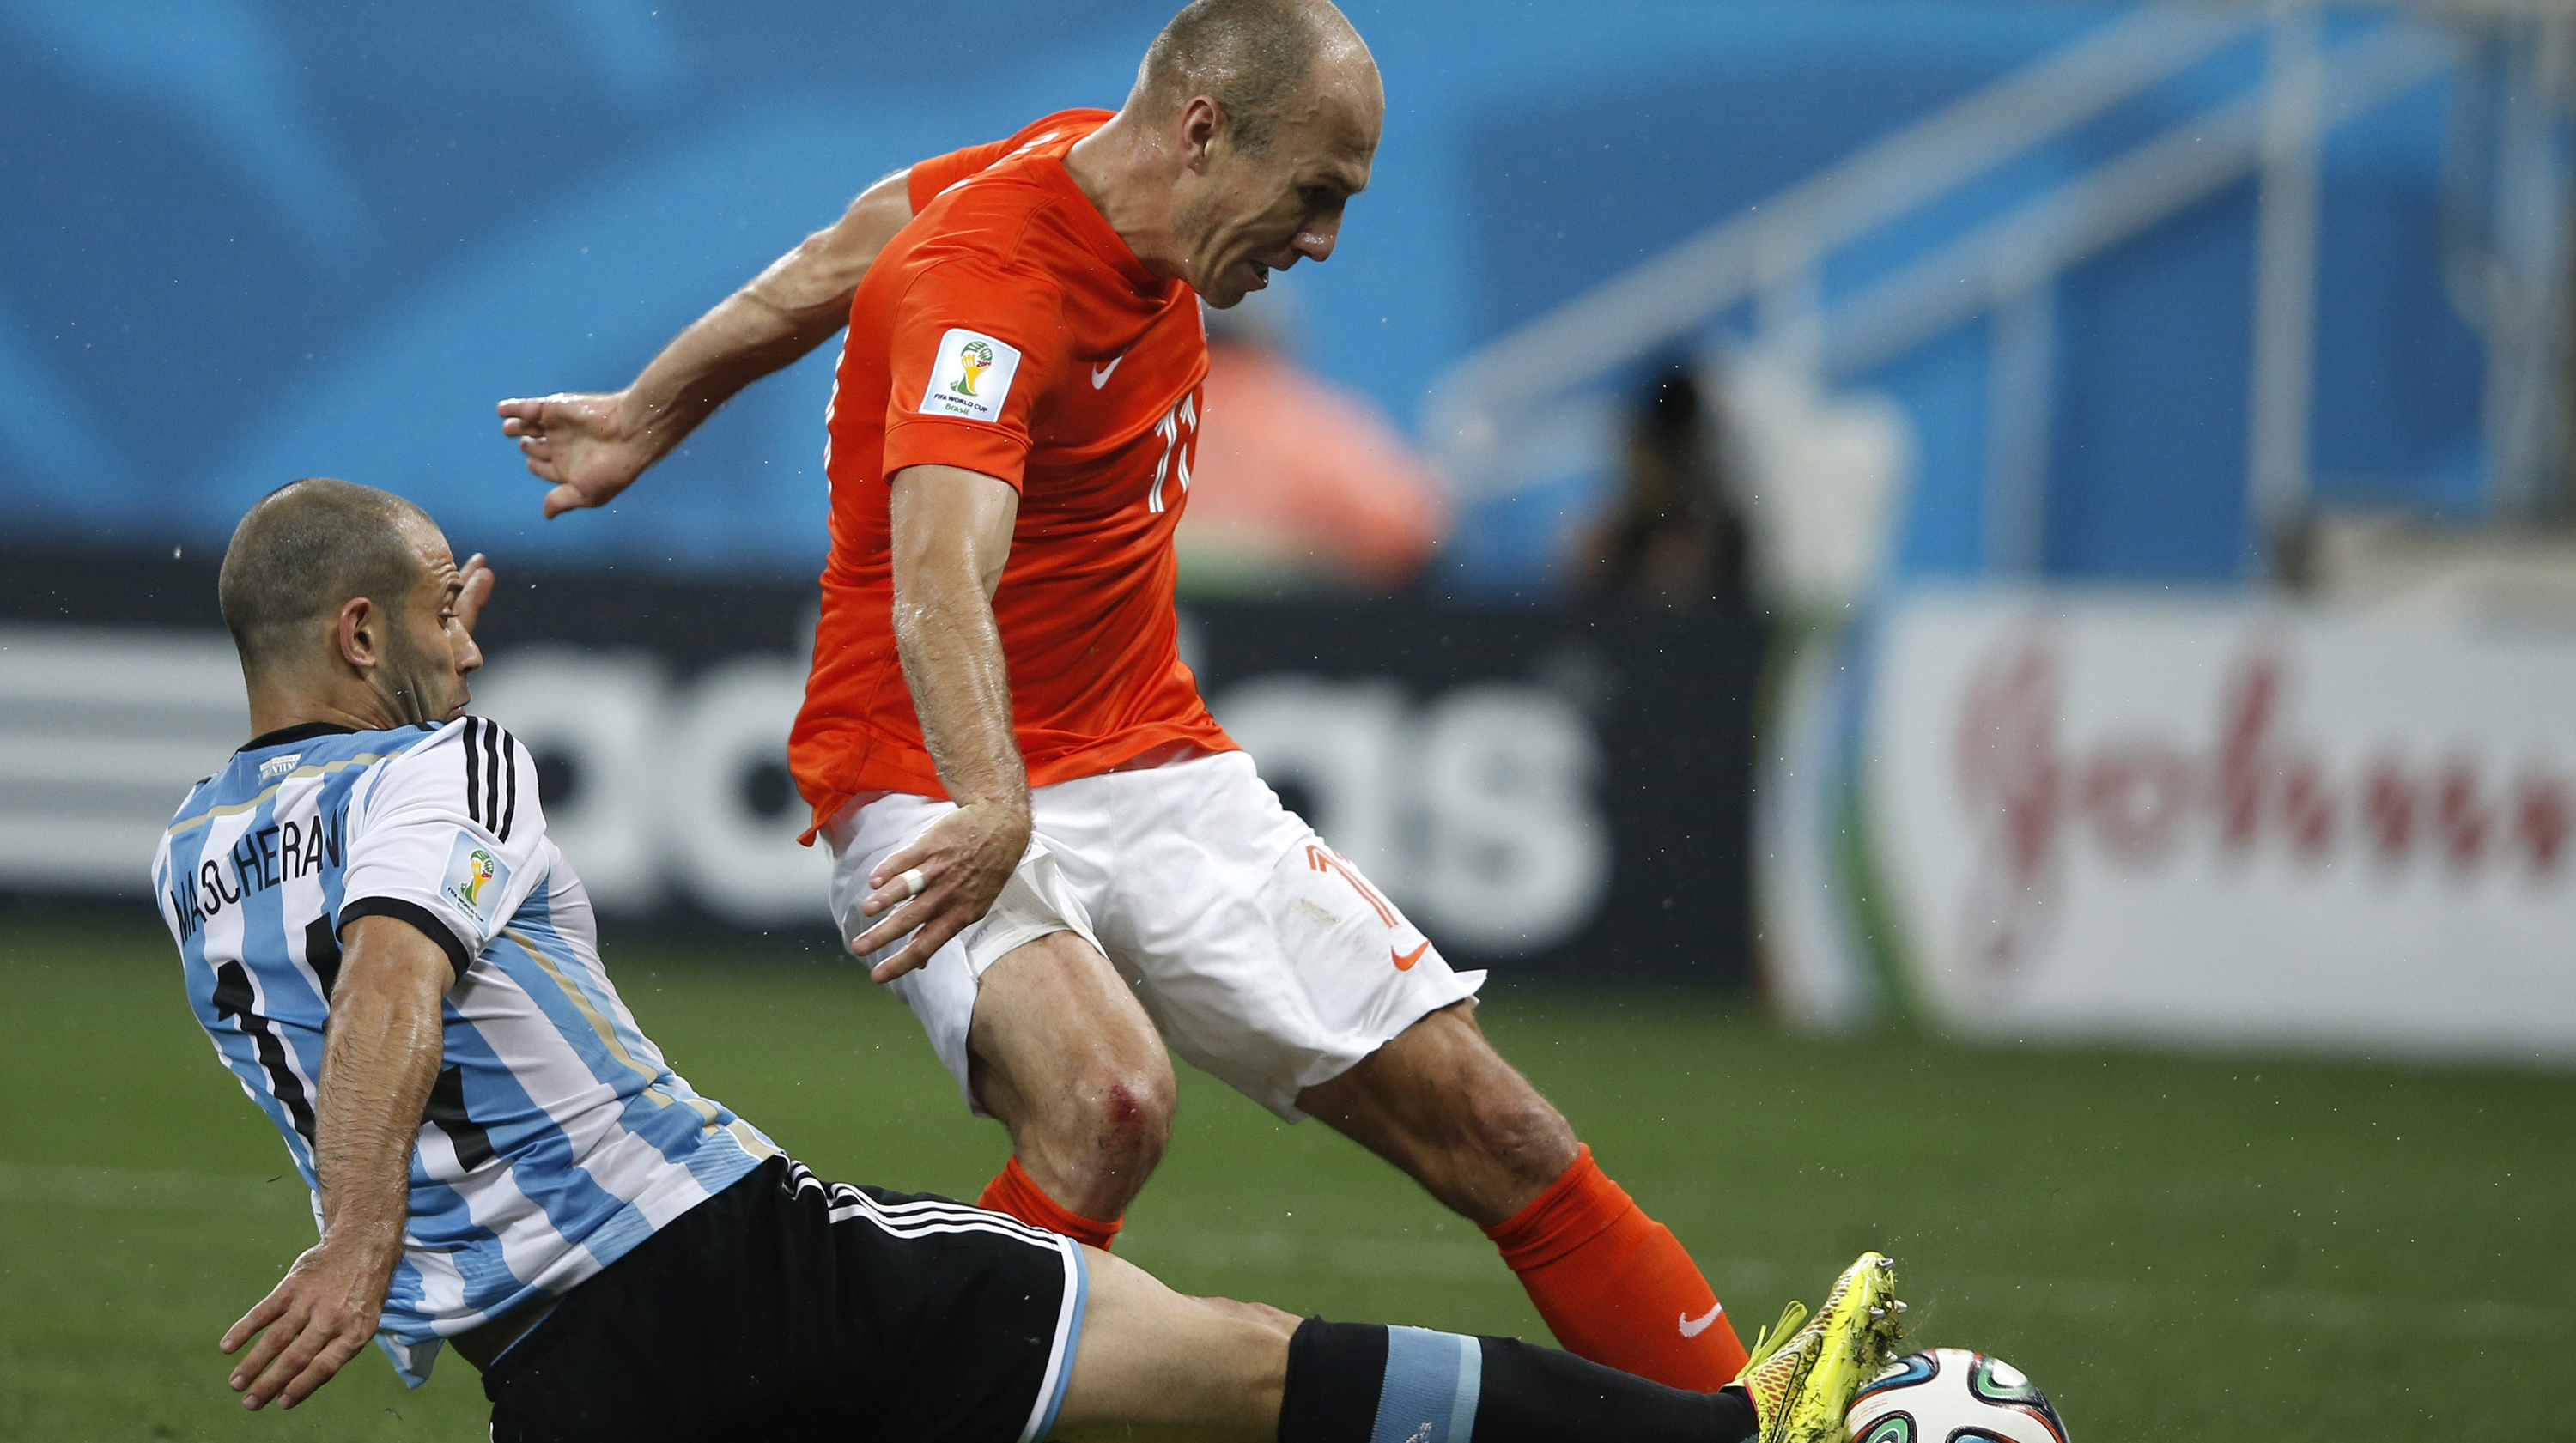 Argentina's midfielder Javier Mascherano (L) vies with Netherlands' forward Arjen Robben (R) during the semi-final football match between Netherlands and Argentina of the FIFA World Cup at The Corinthians Arena in Sao Paulo on July 9, 2014.